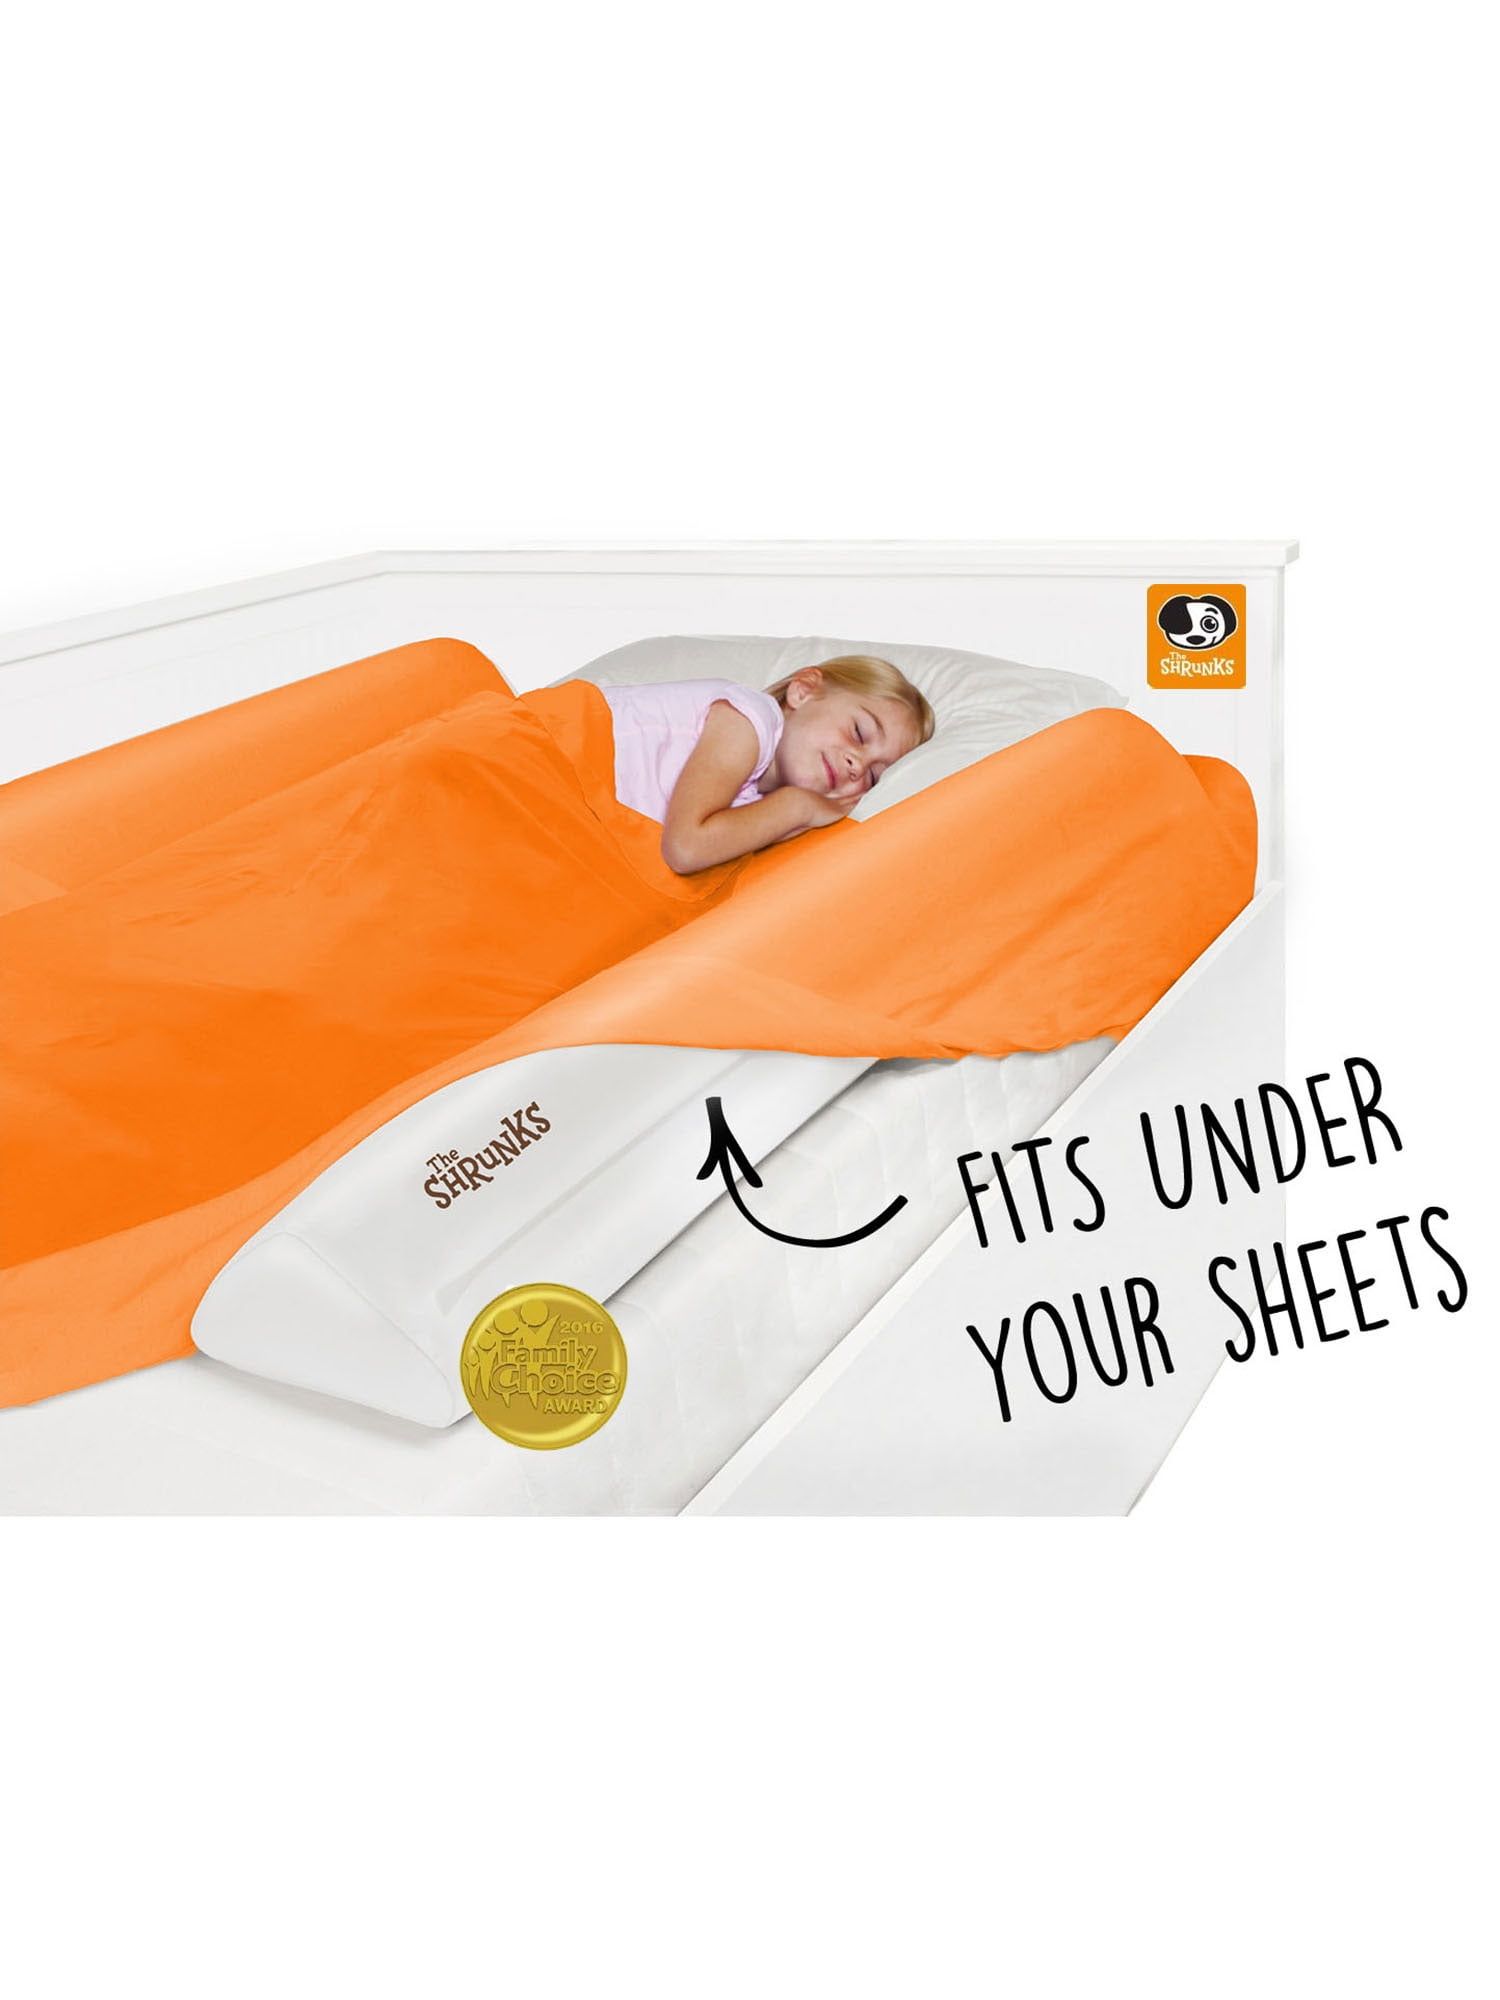 NEW The Shrunks Sleep Secure Inflatable Bed Rail FREE SHIPPING 